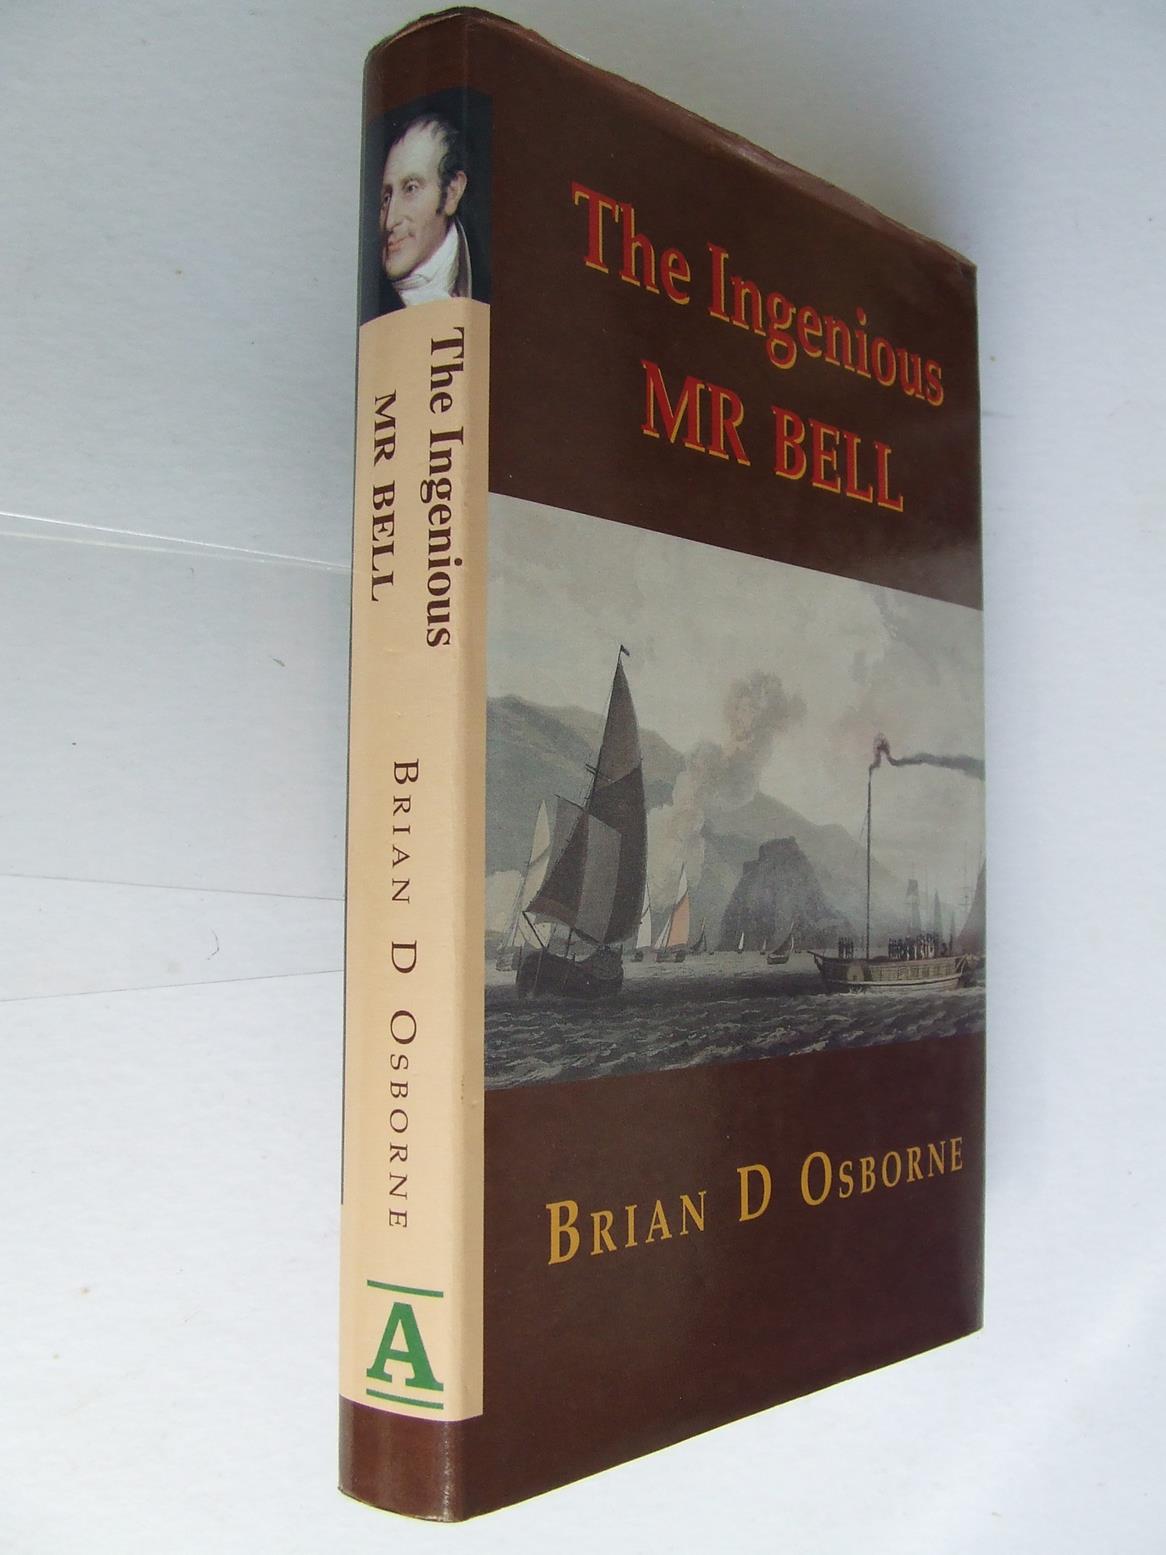 The Ingenious Mr. Bell